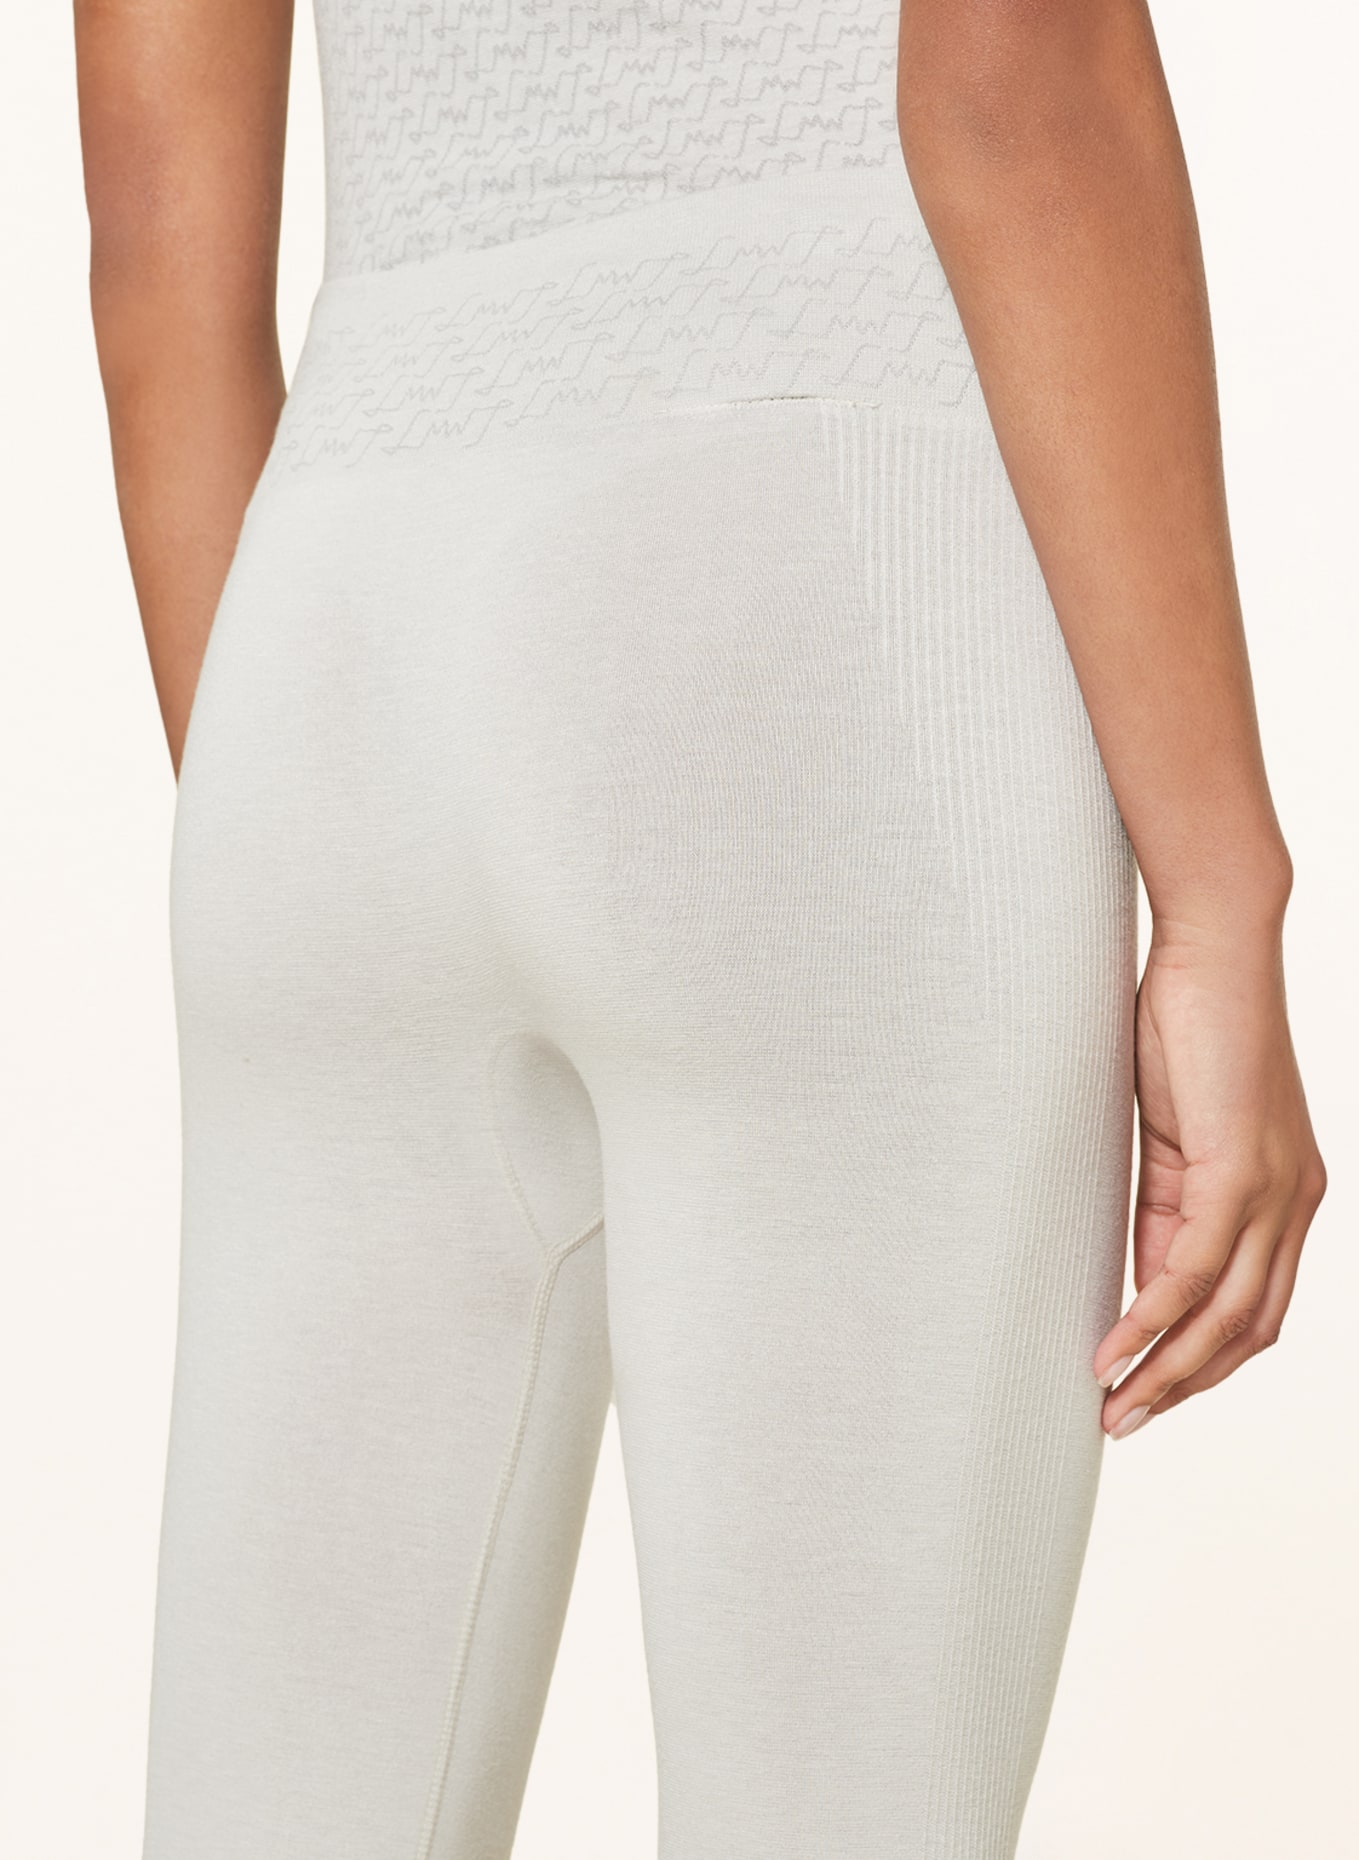 LaMunt Functional underwear trousers ALICE with cashmere, Color: CREAM (Image 6)